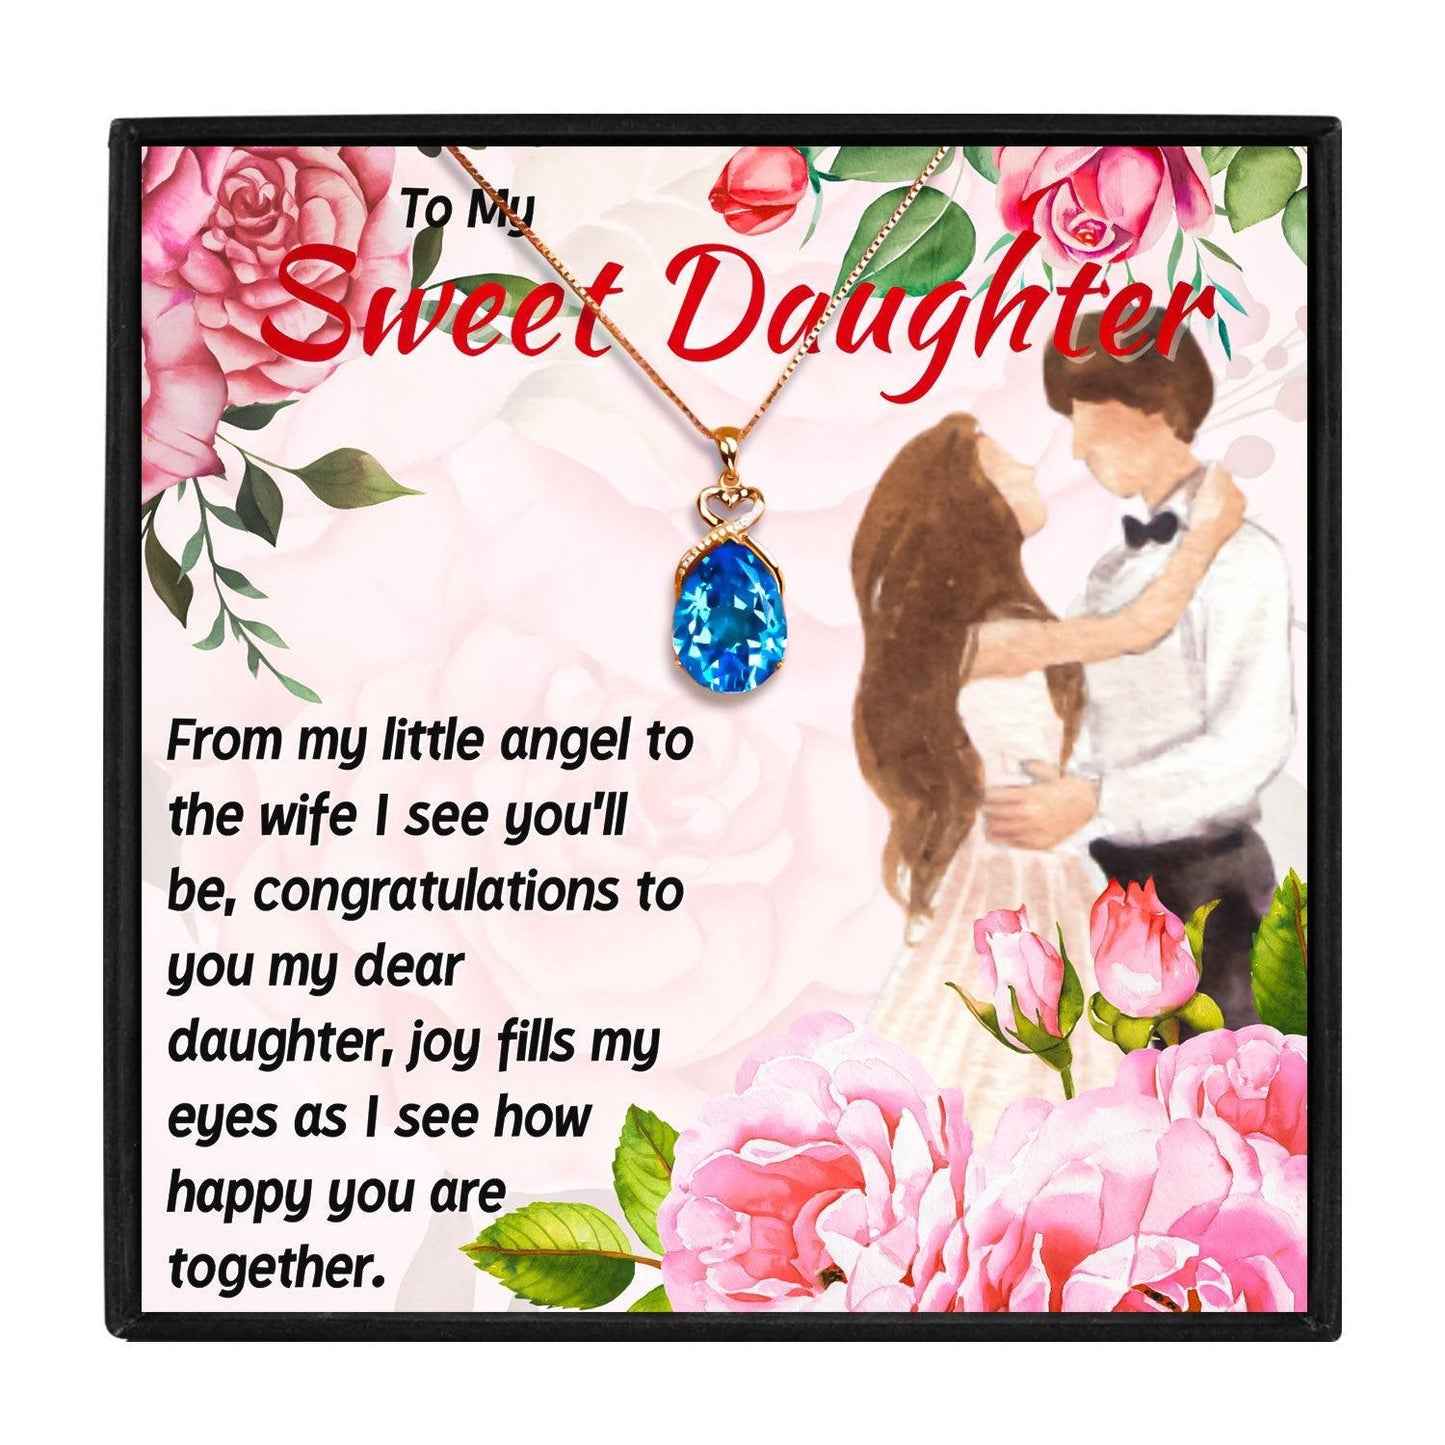 Wedding Gifts for Your Very Special Daughter in 2023 | Wedding Gifts for Your Very Special Daughter - undefined | Daughter Wedding Gift From Mom, Gifts for the Bride from Her Mother, Mother Daughter Wedding Gift | From Hunny Life | hunnylife.com